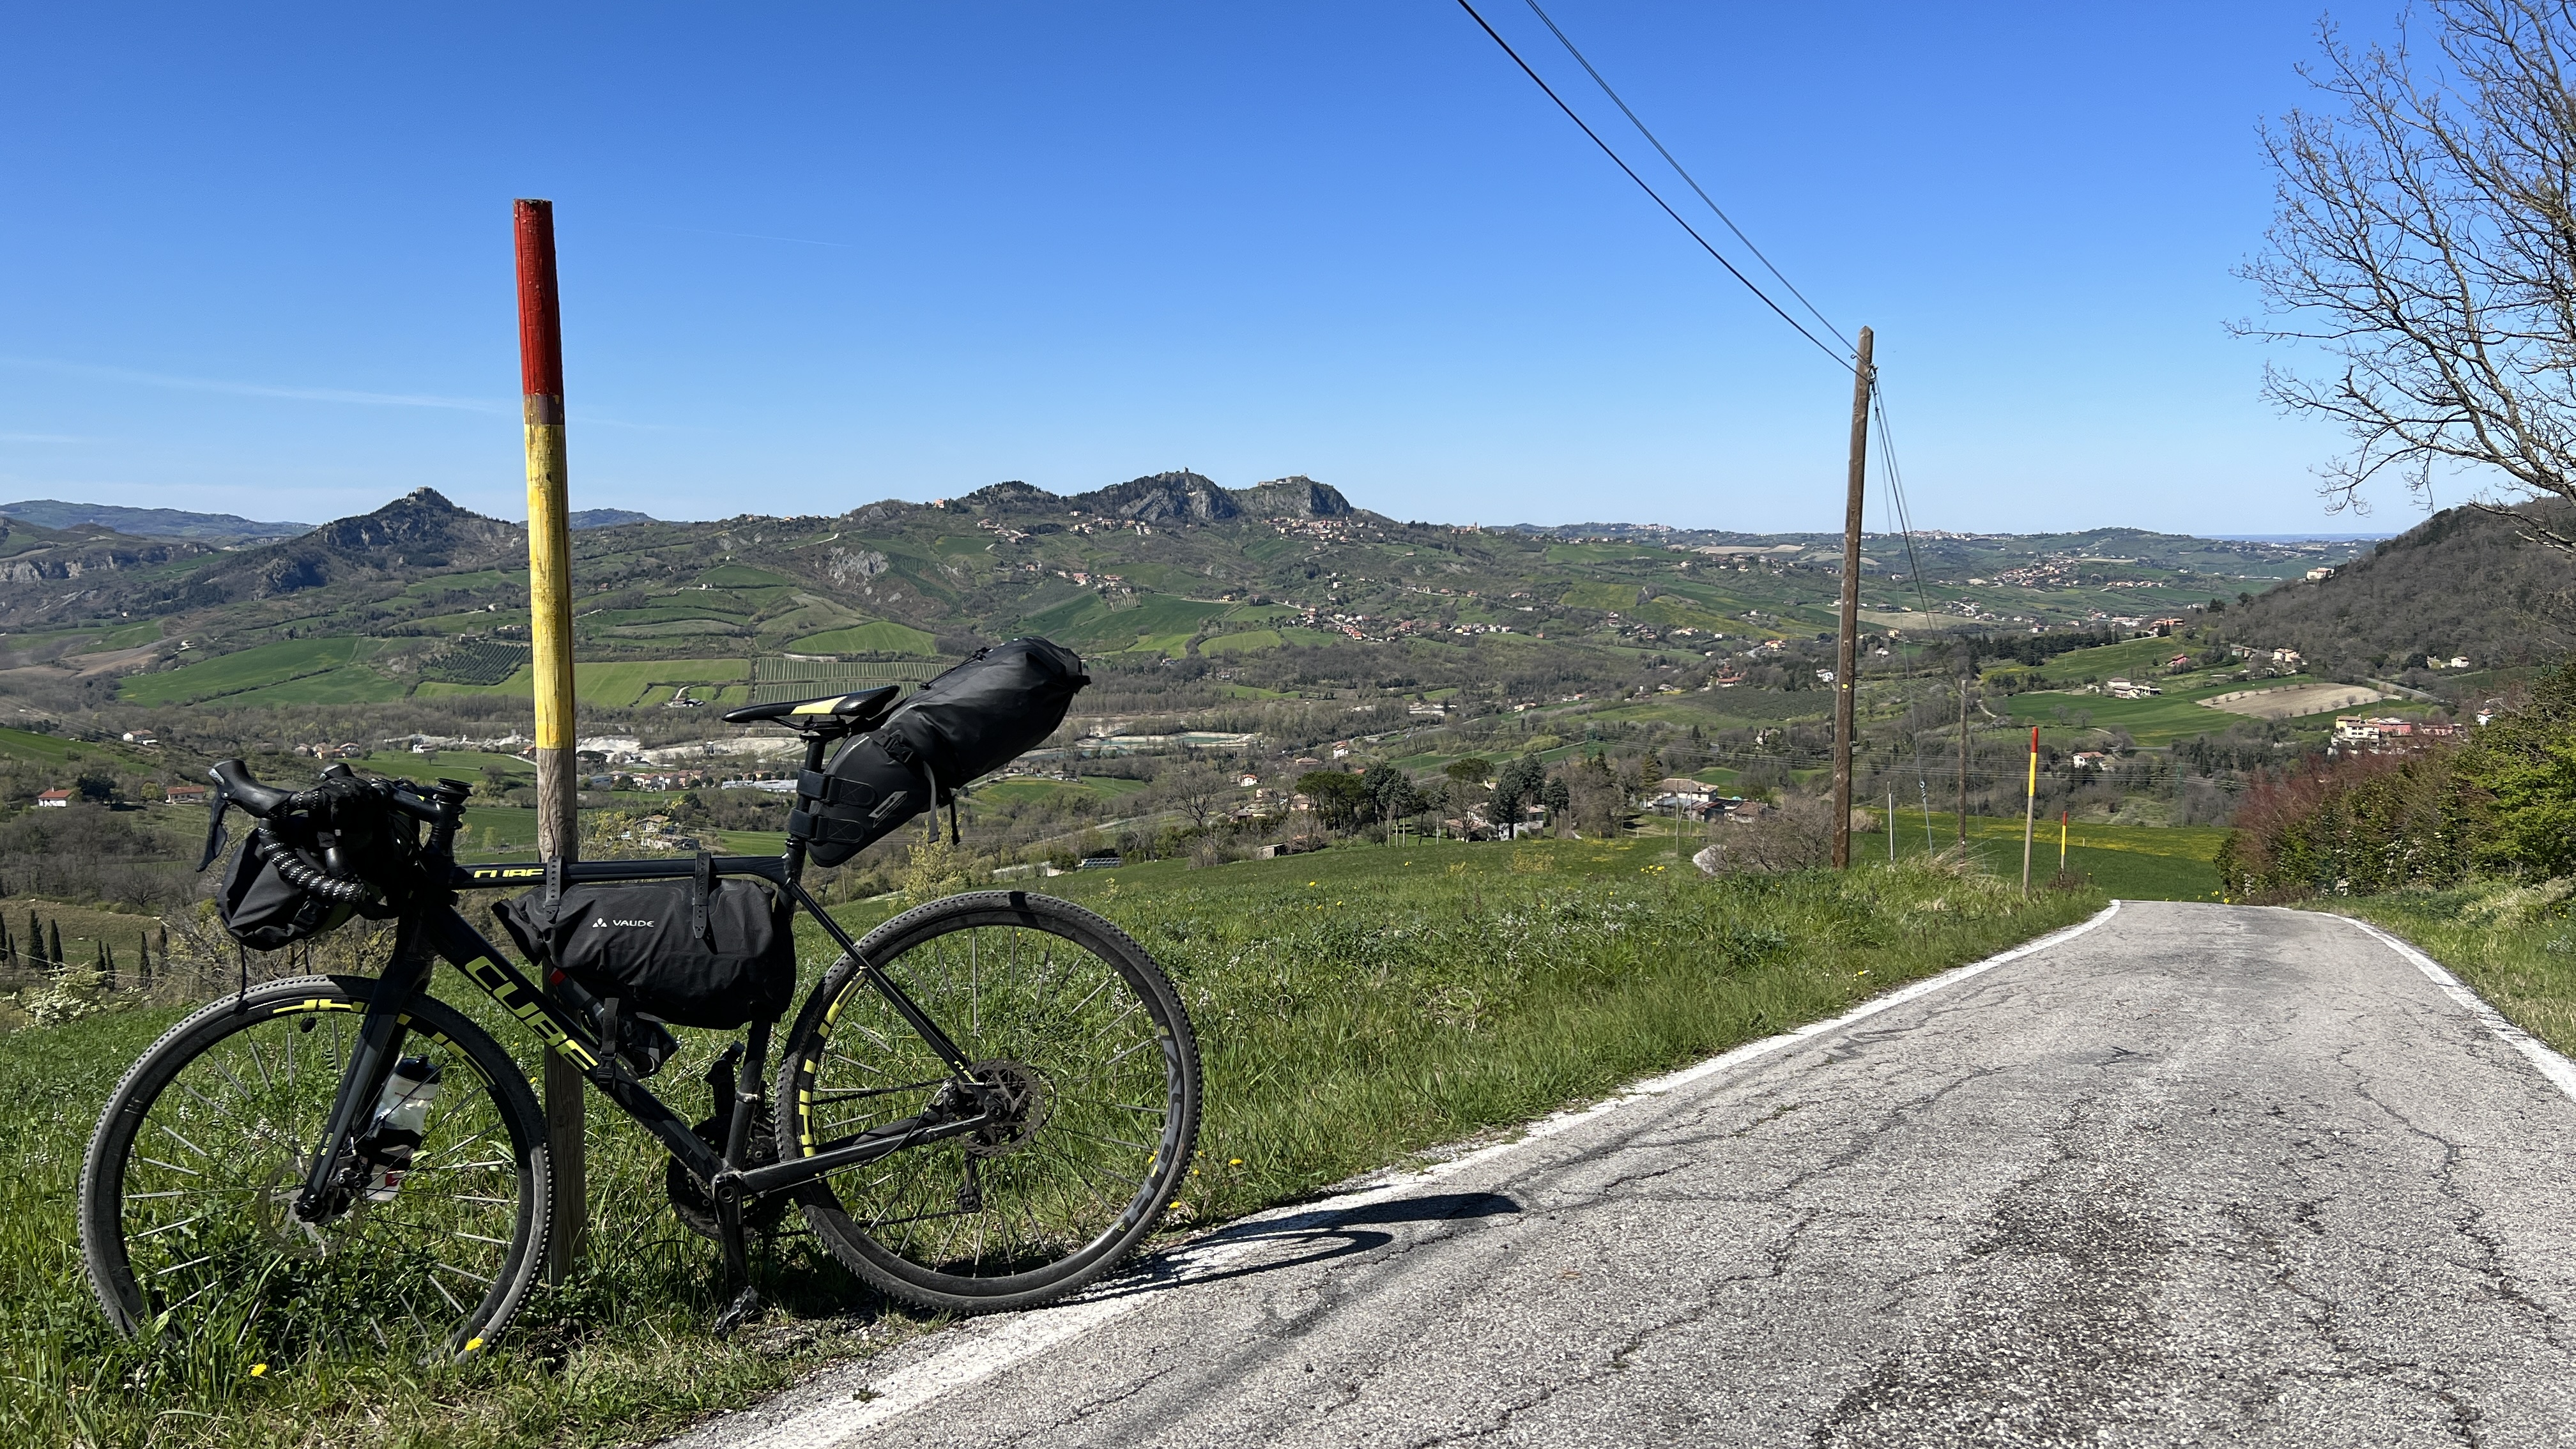 My bikepacking trip in Italy in March 2023